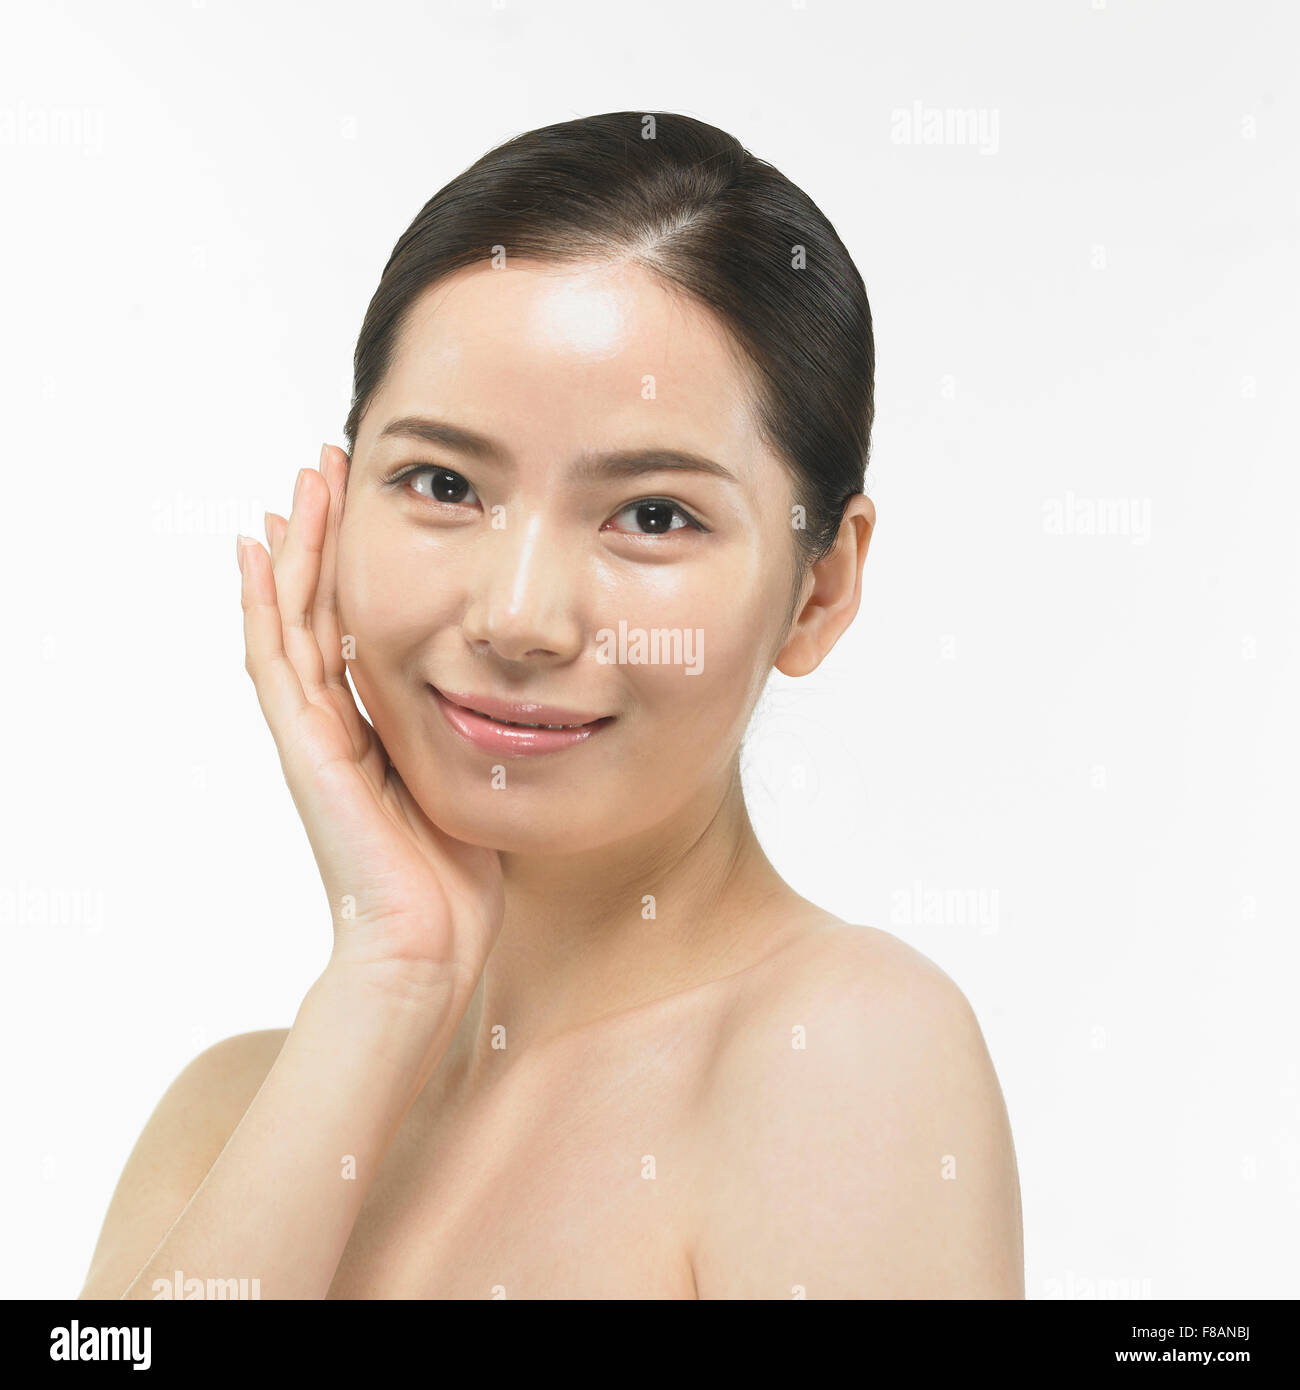 Portrait of smiling Korean woman staring at/touching her face Banque D'Images